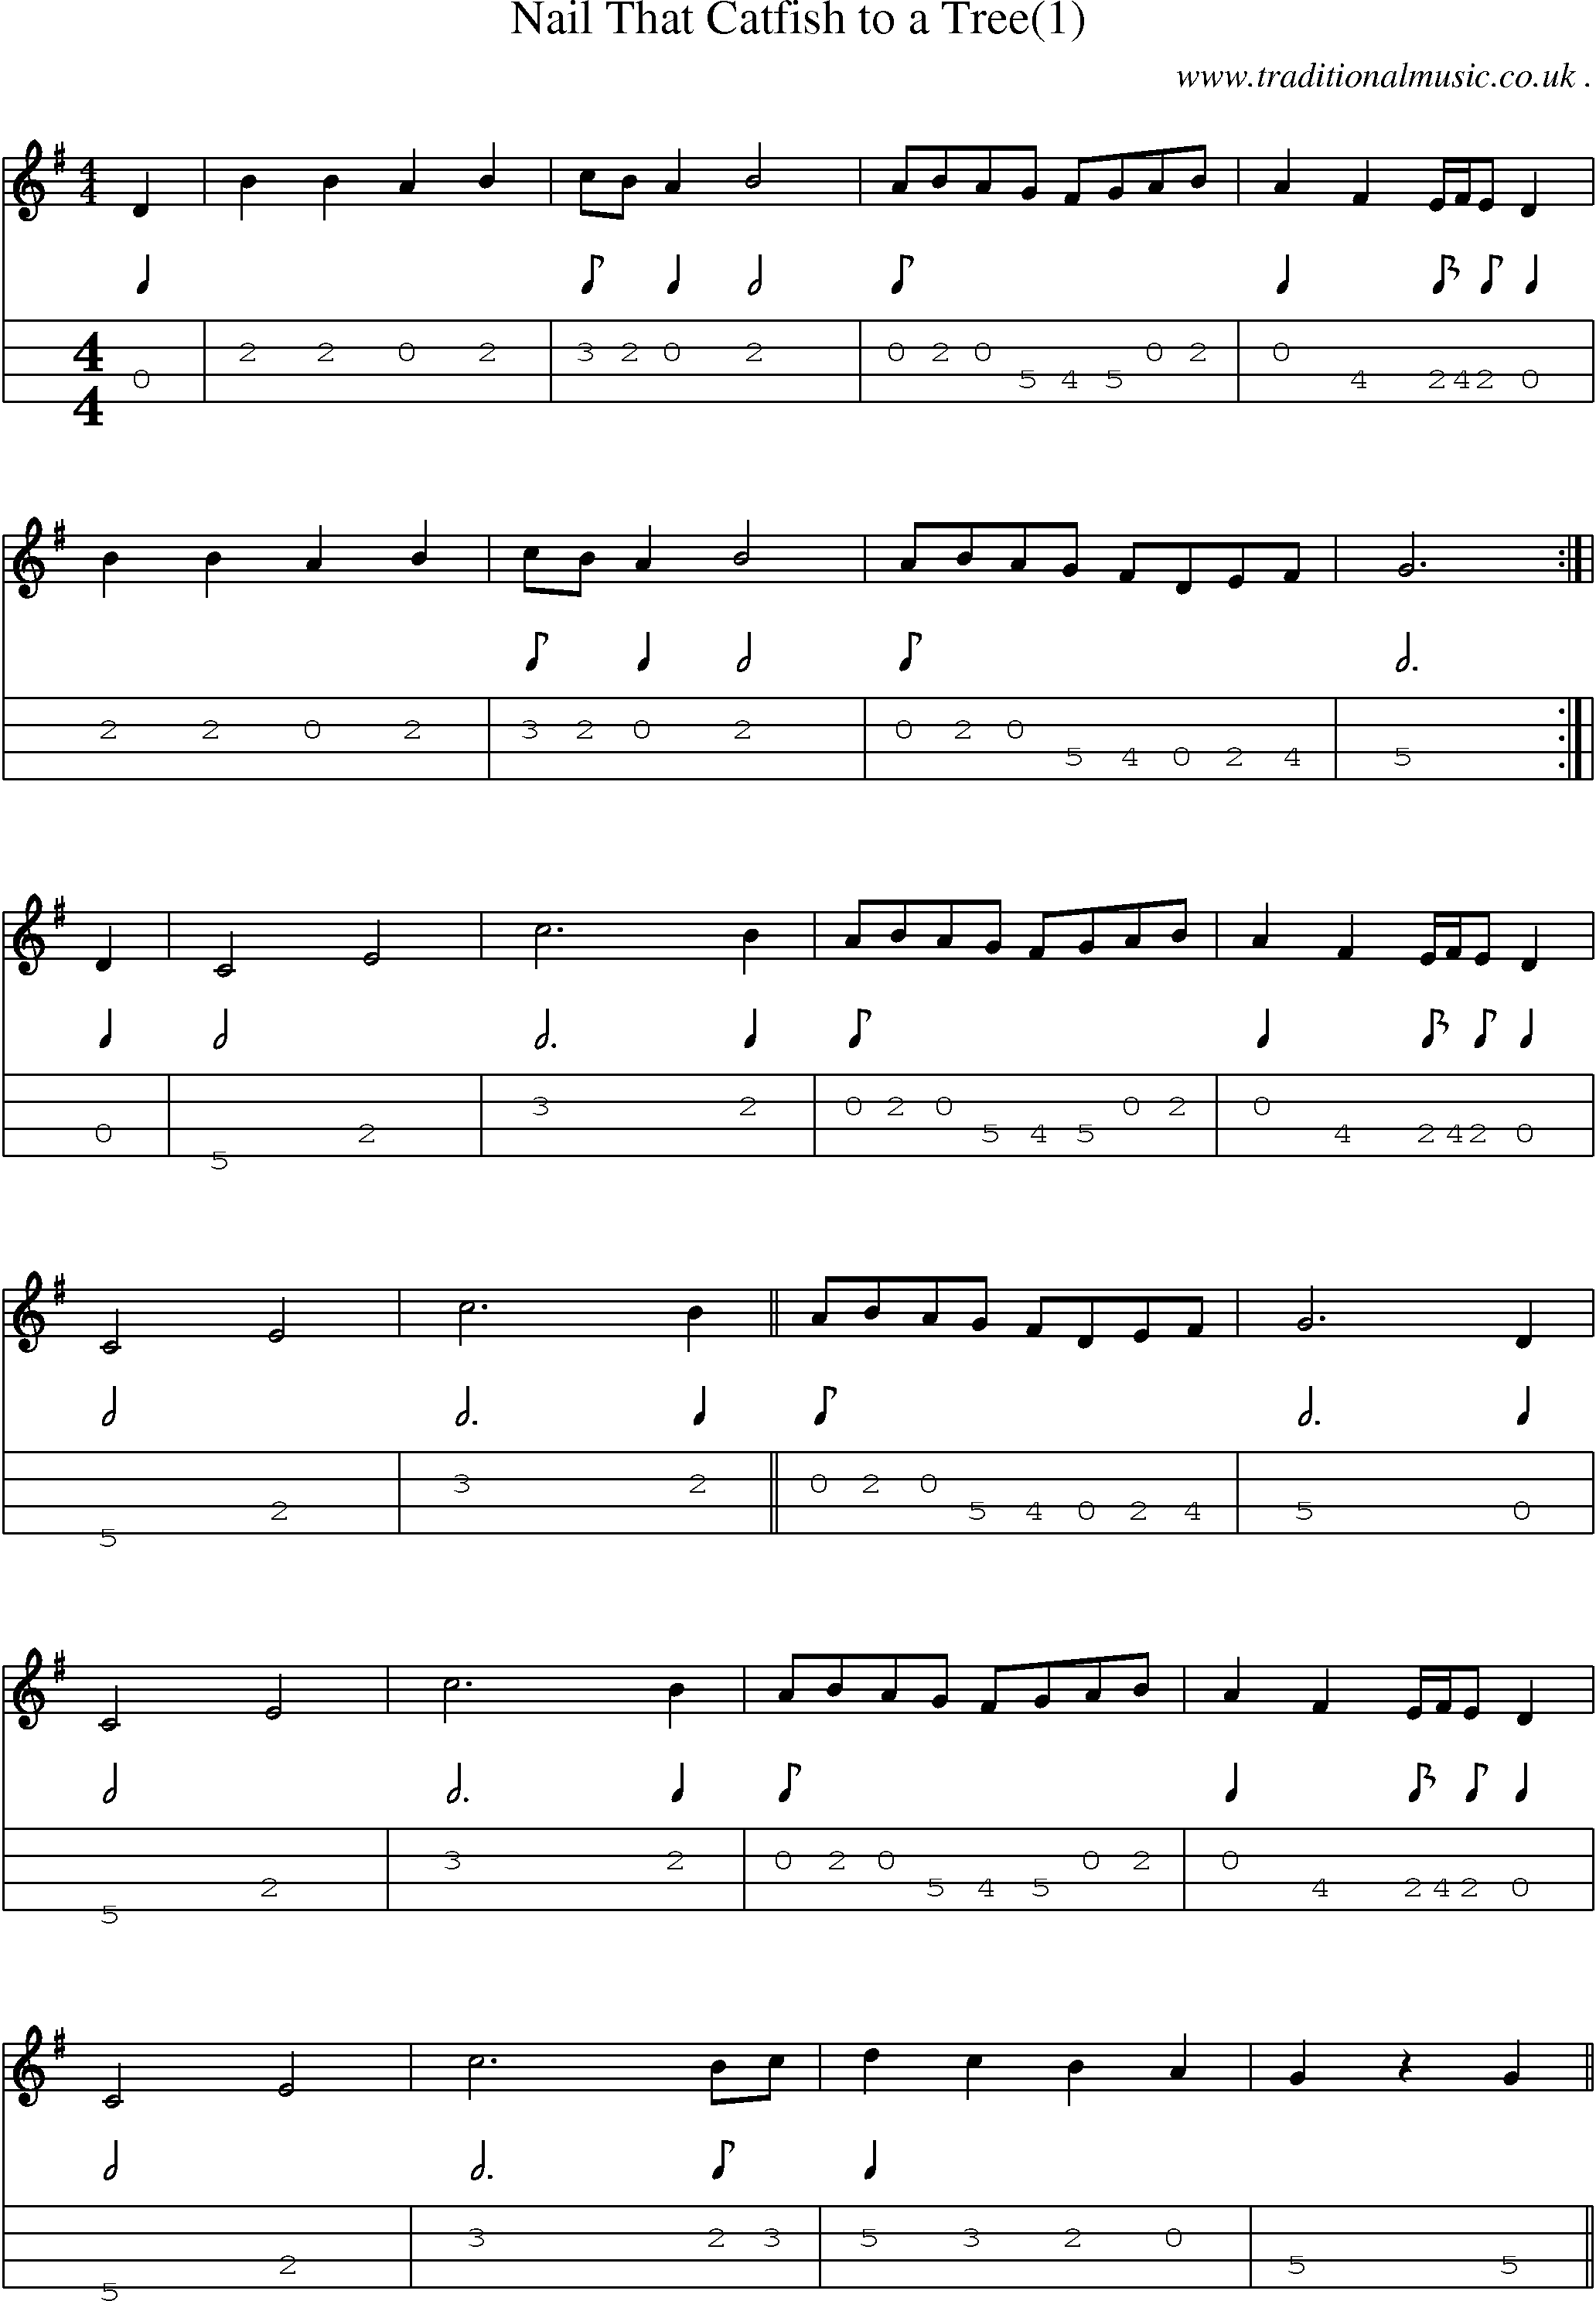 Music Score and Mandolin Tabs for Nail That Catfish To A Tree(1)